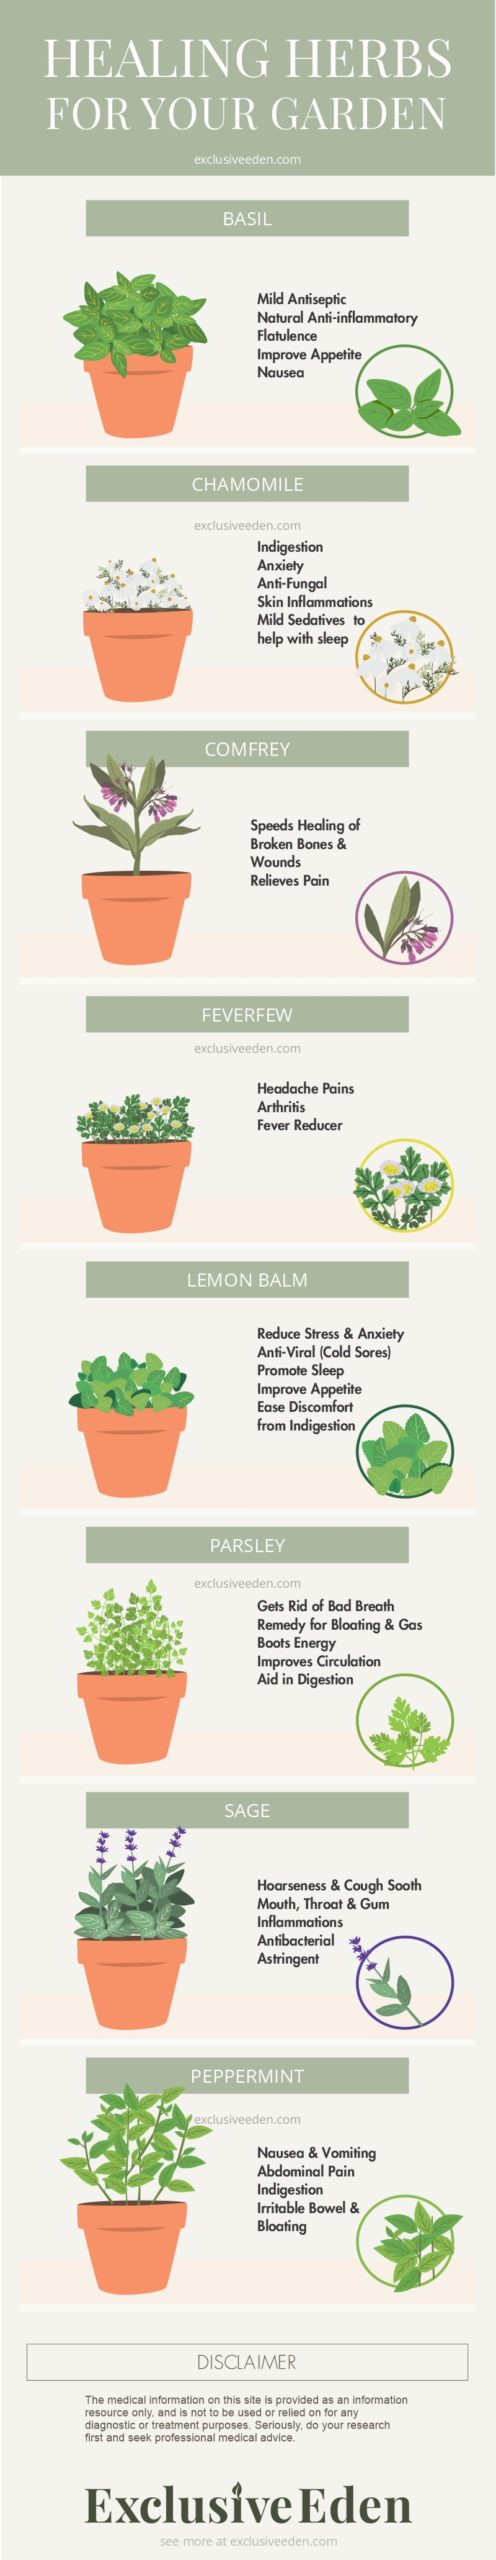 Illustrated infographic on healing herbs for your garden.